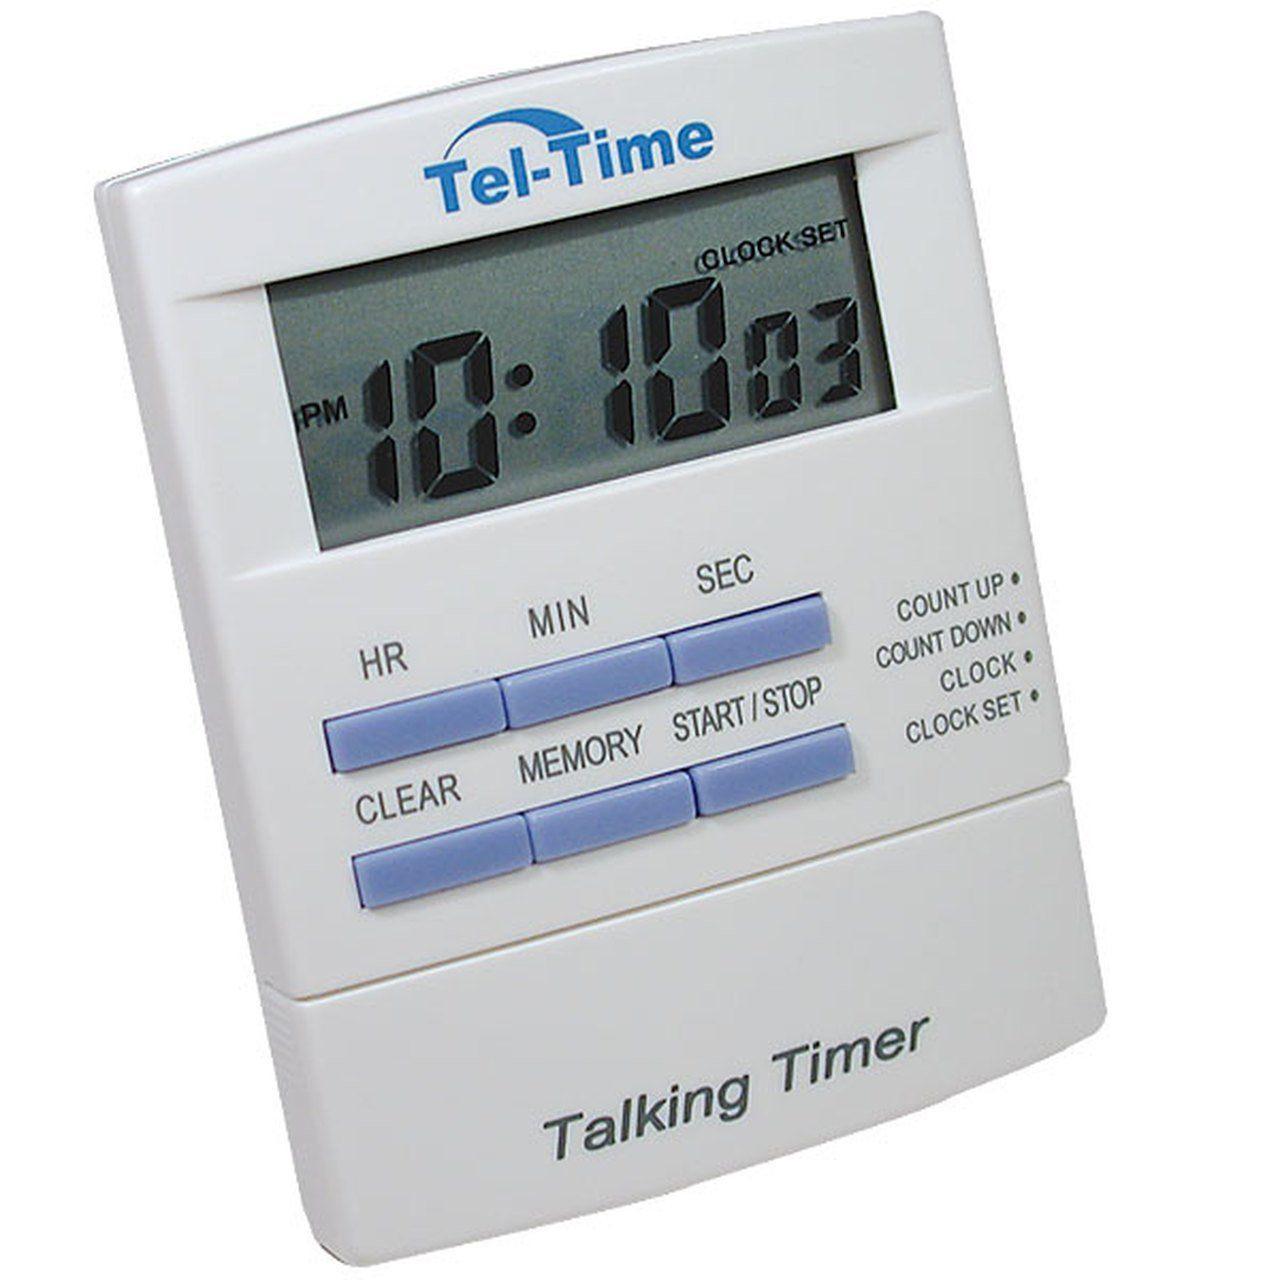 Talking Countdown Timer - The Low Vision Store